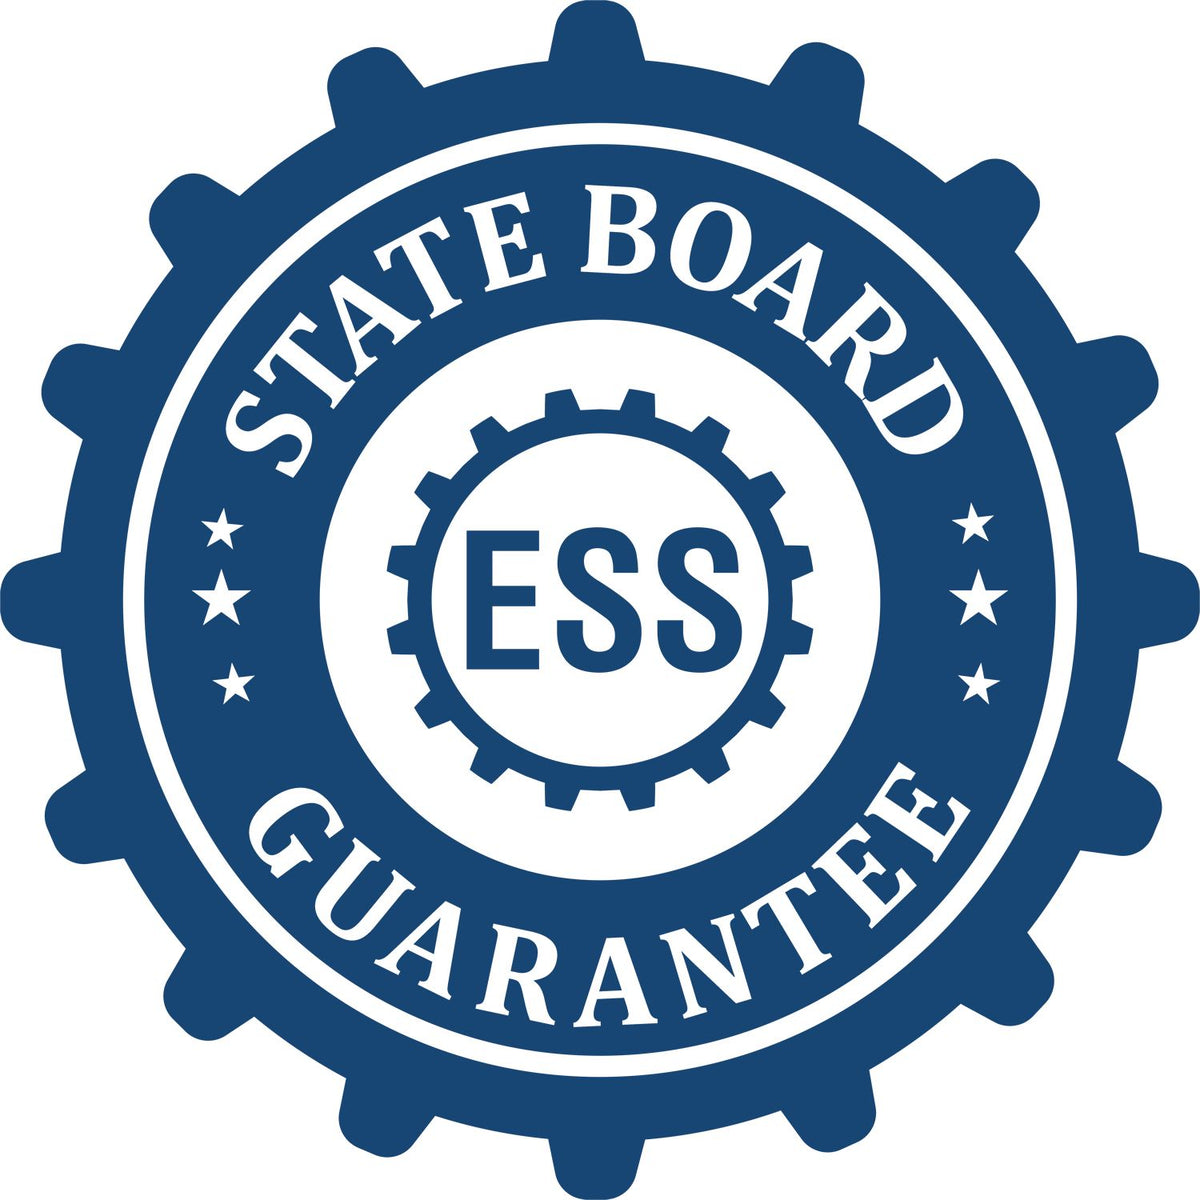 An emblem in a gear shape illustrating a state board guarantee for the Nebraska Engineer Desk Seal product.